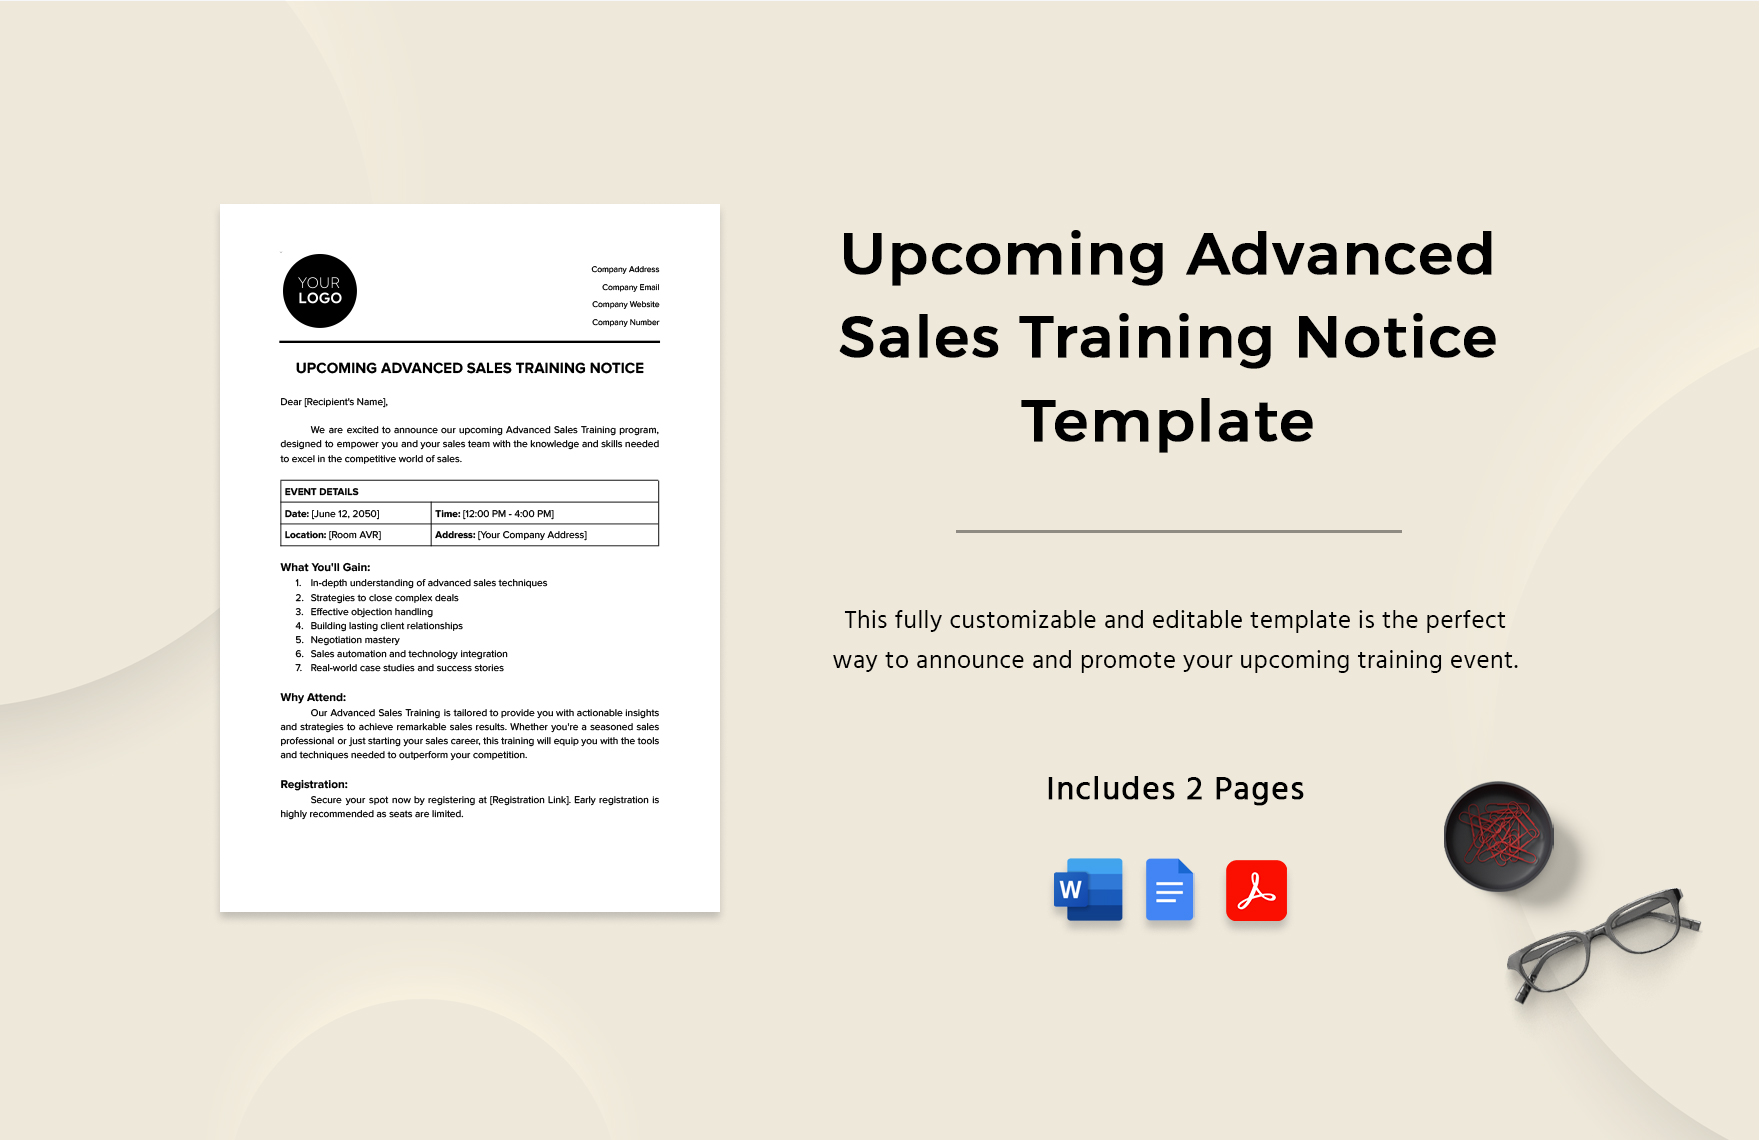 Upcoming Advanced Sales Training Notice Template in Word, Google Docs, PDF